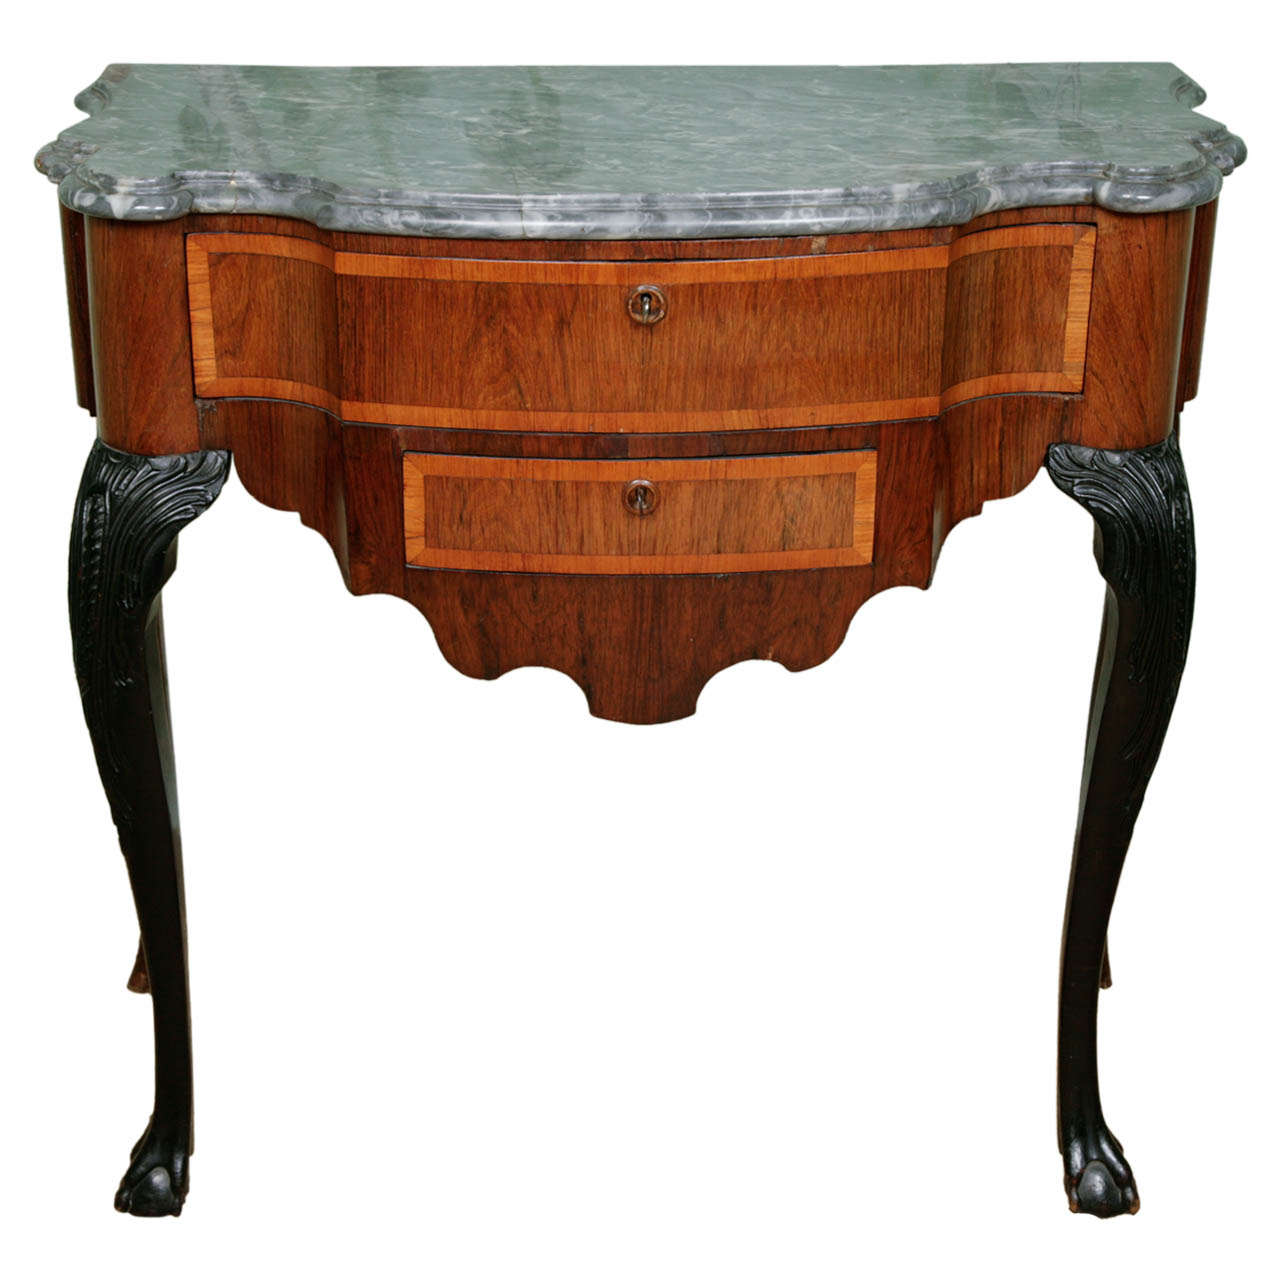 Dutch Rococo 18th Century Side Table with Marble Top